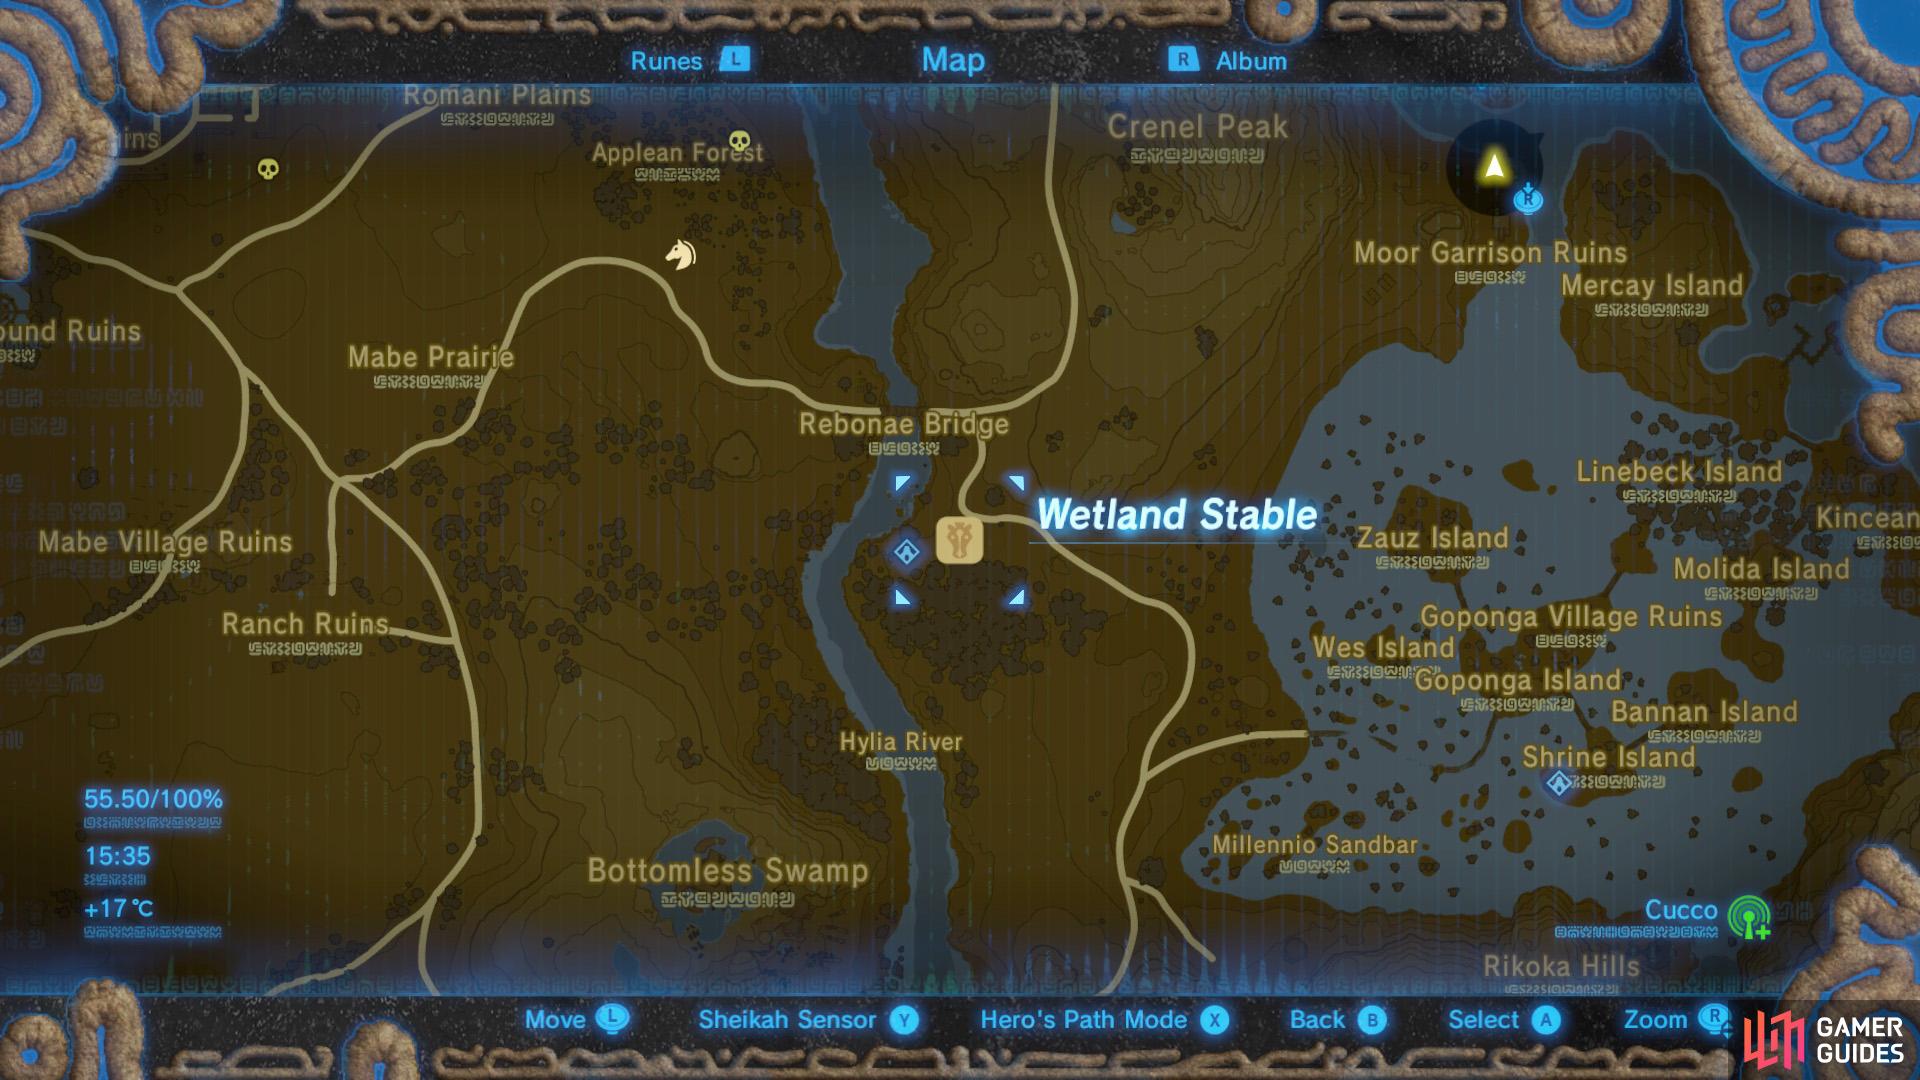 Wetland Stable, to the east of Hyrule Field.